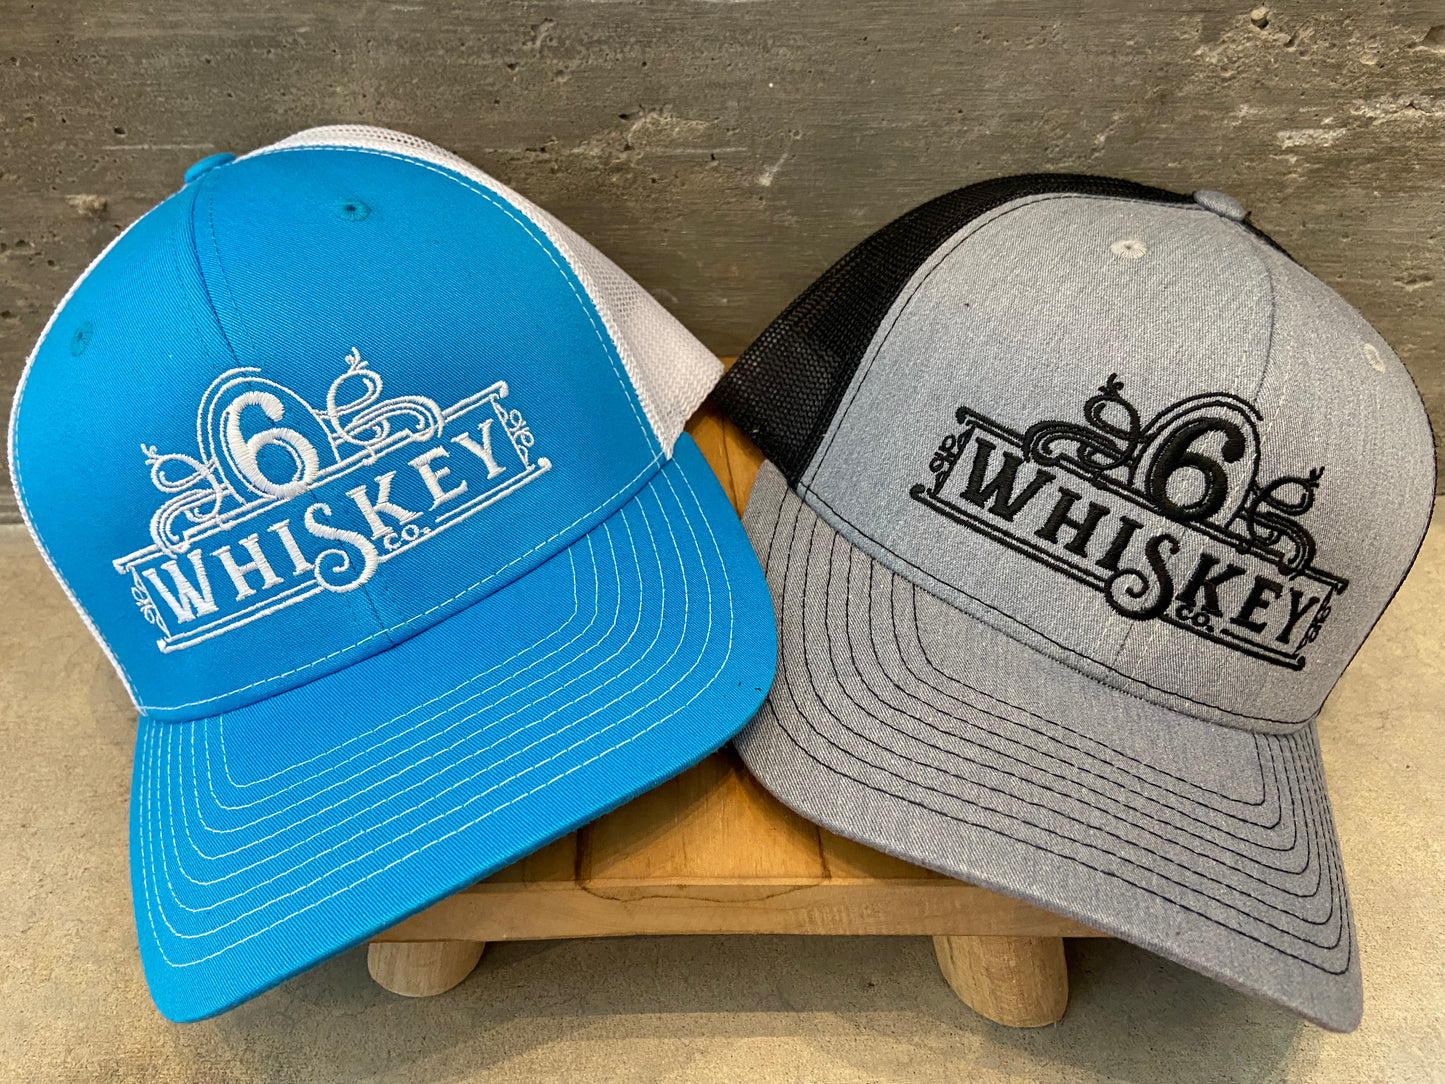 6Whiskey Richarson 112 Trucker Hat in blue and white or grey and black store logo mesh back cap